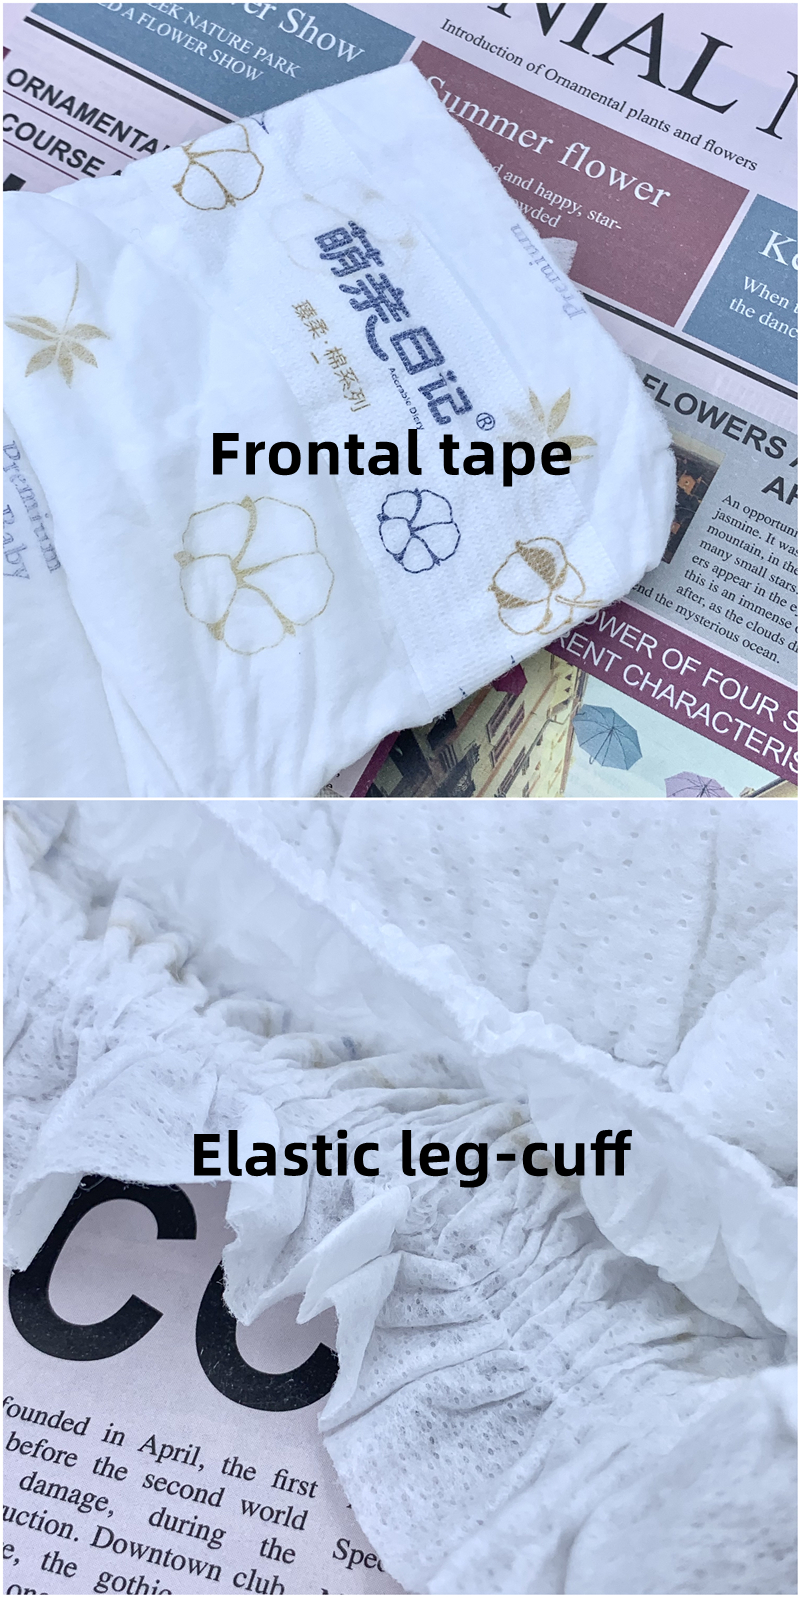 cheap baby diapers